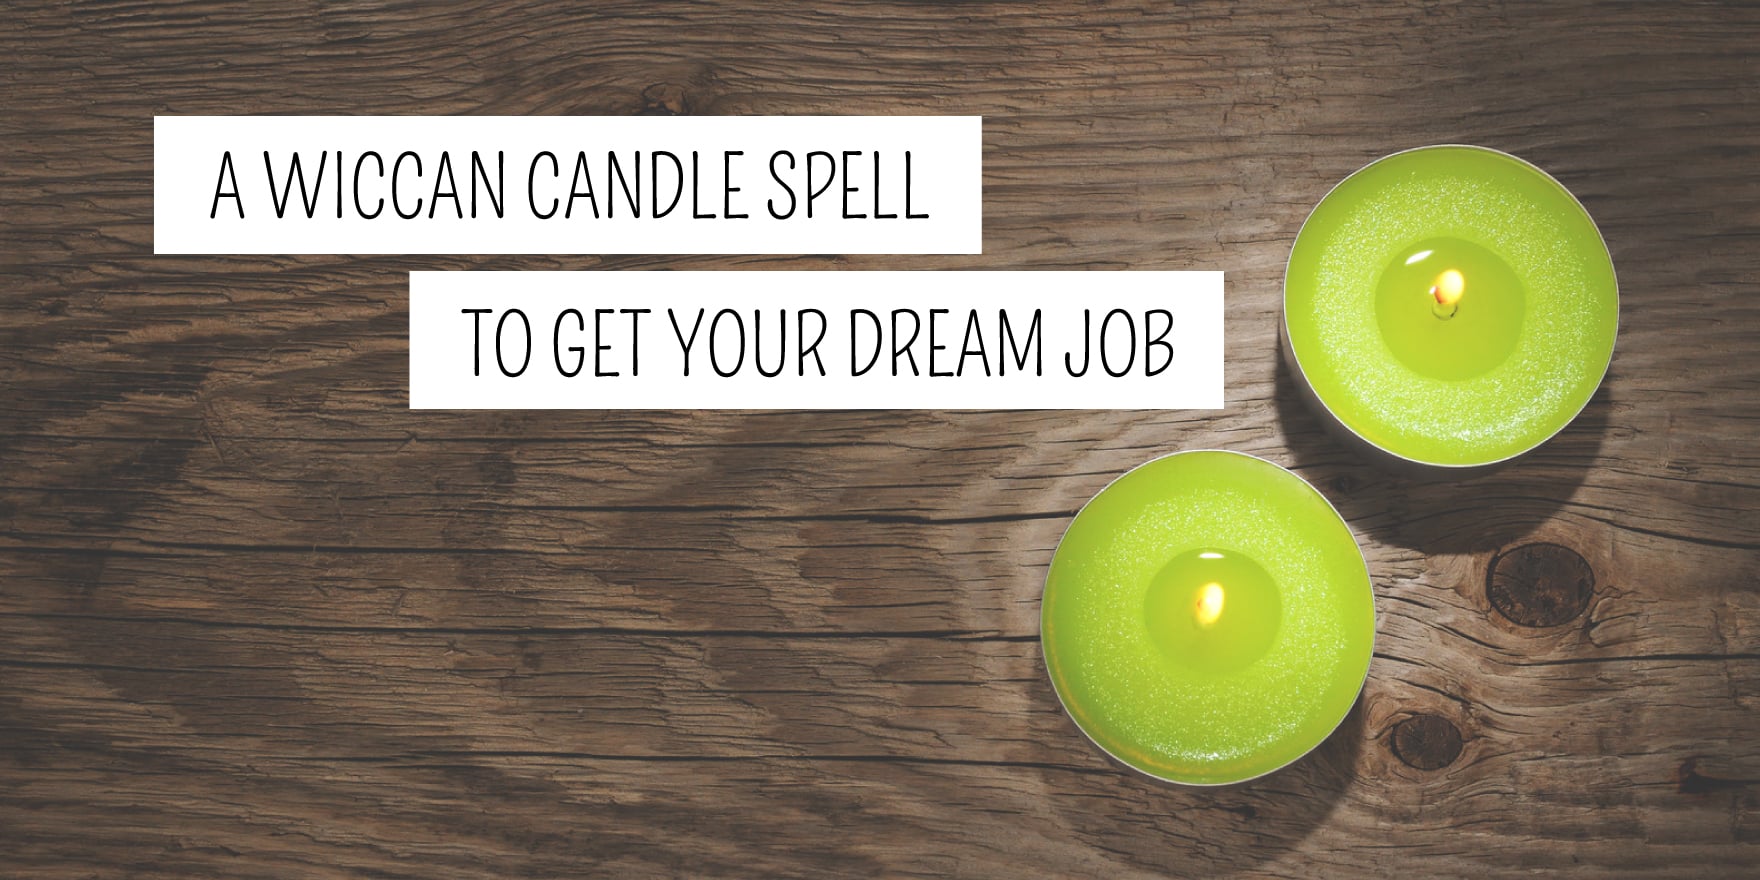 Two lit green candles on a wooden surface with text "a wiccan candle spell to get your dream job", available at our metaphysical shop.